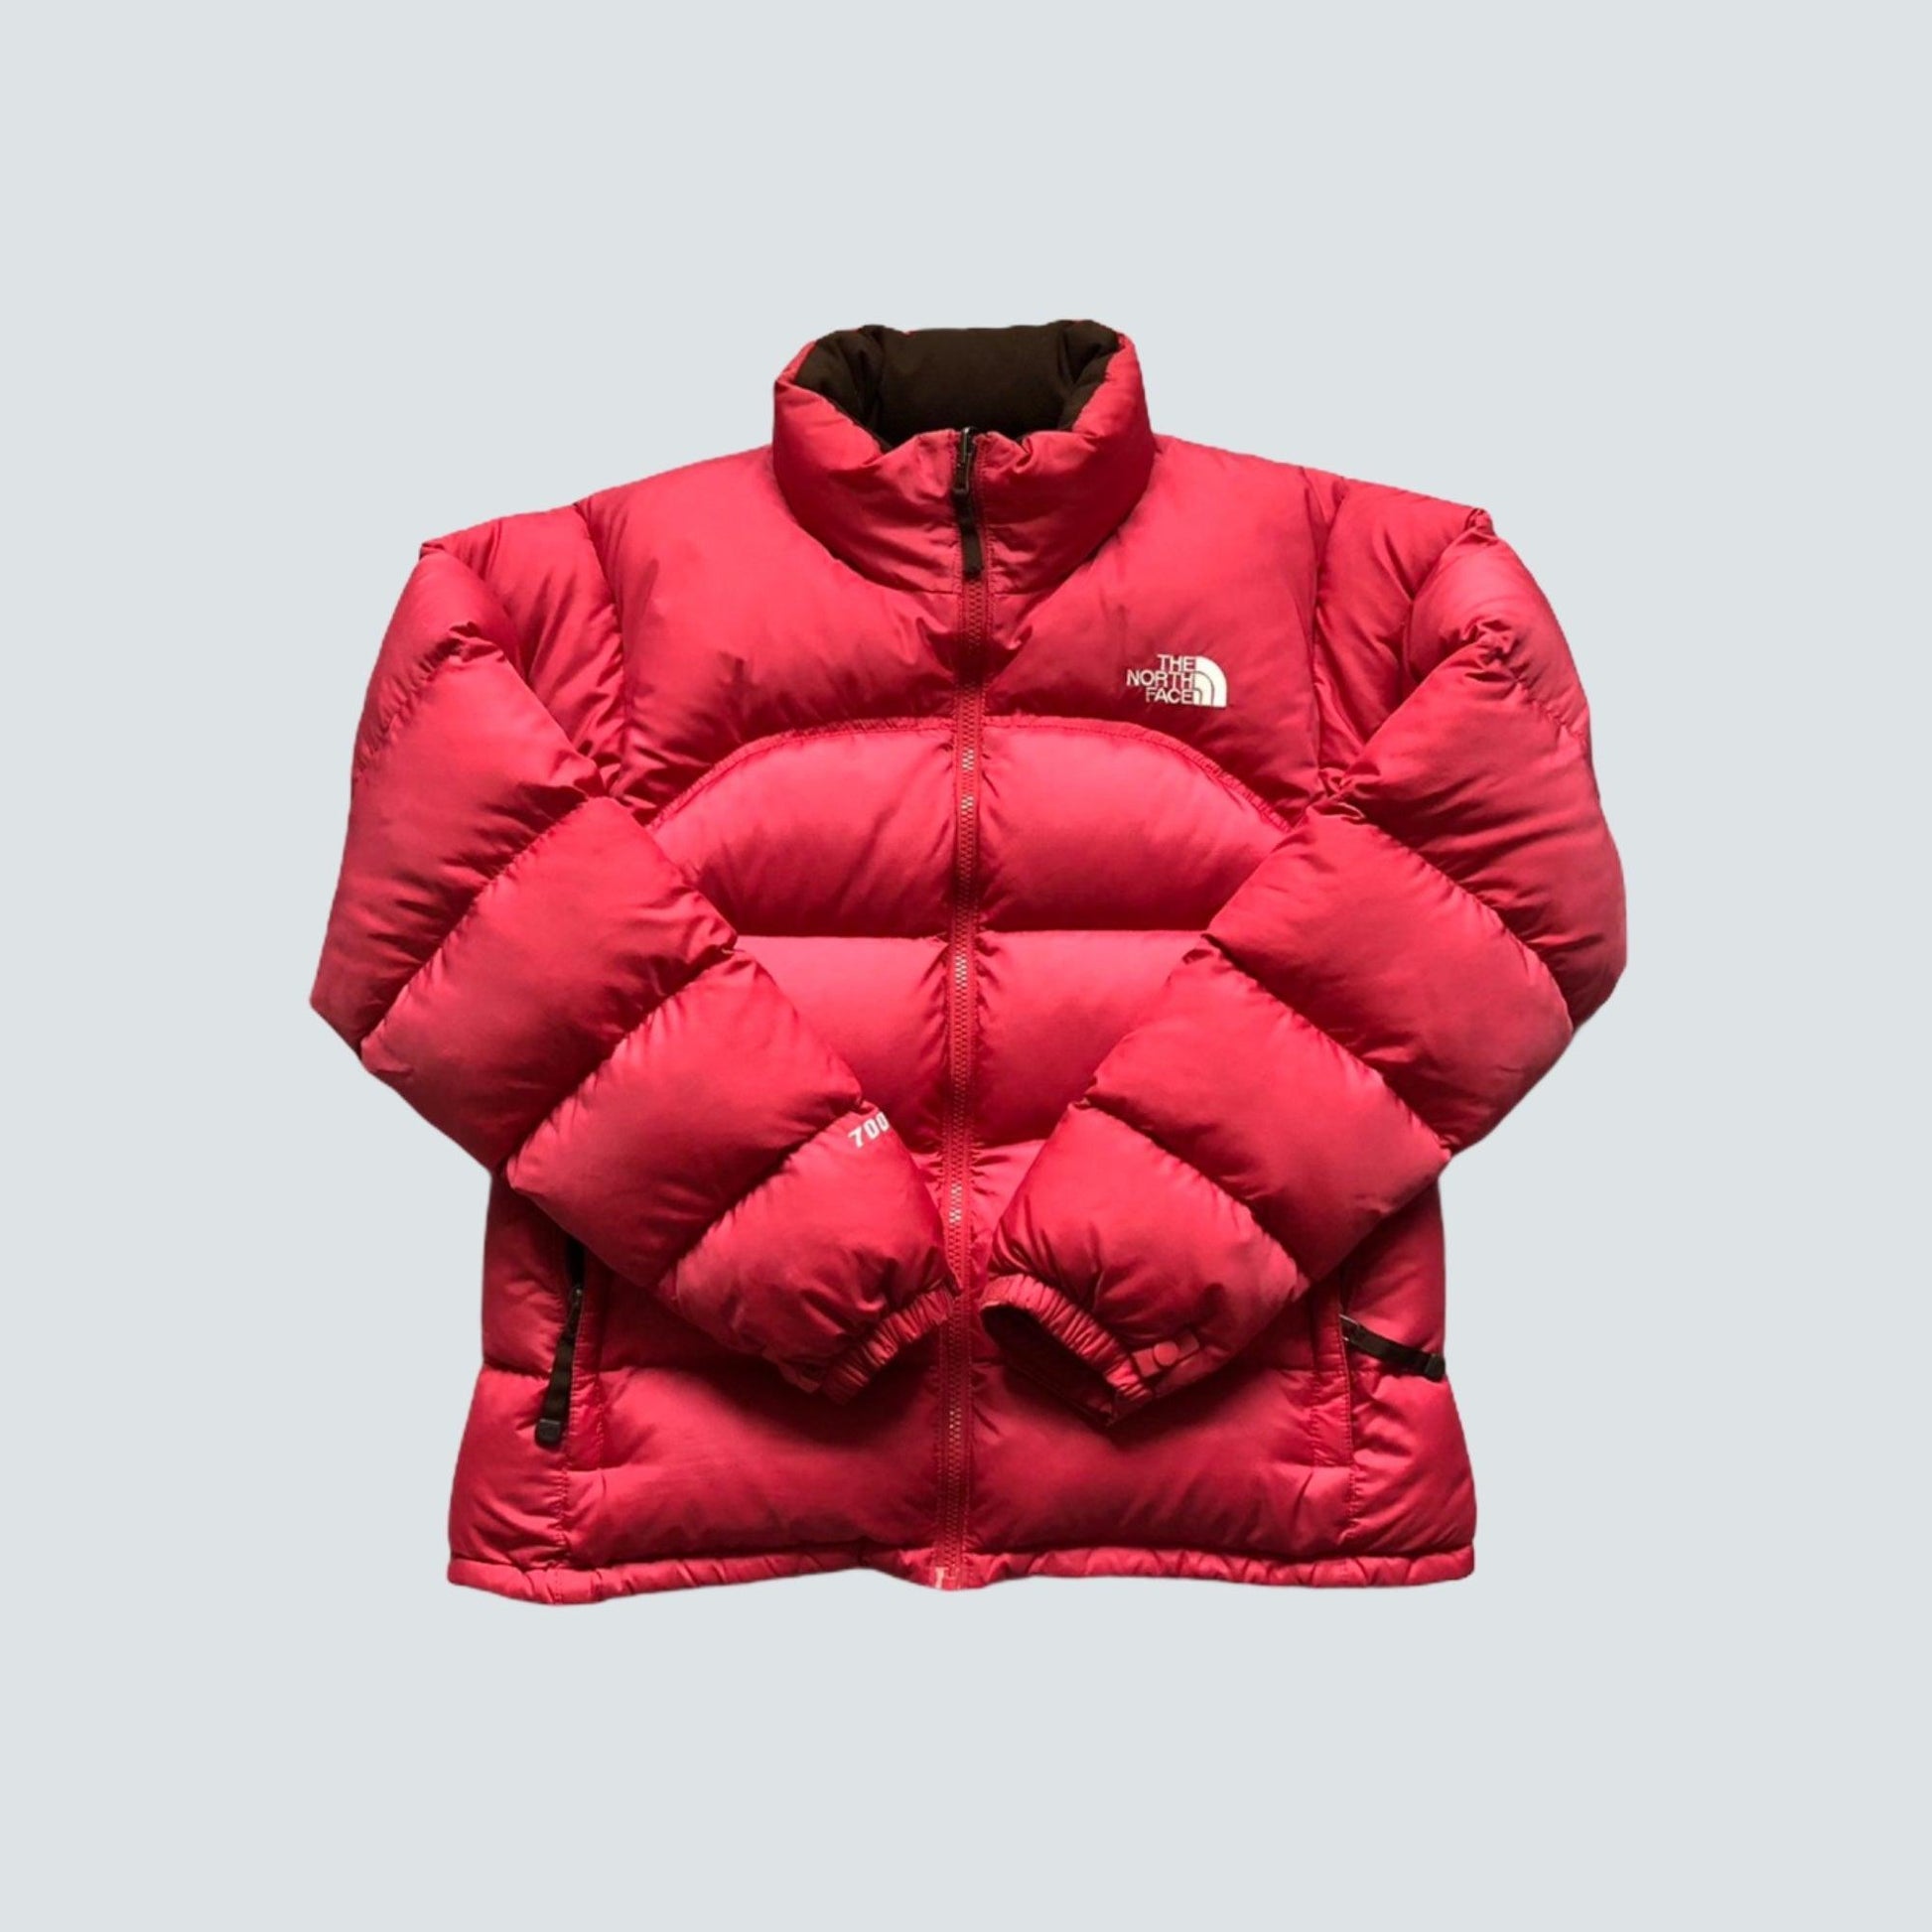 Pink North Face Nuptse 700 Puffer jacket with Brown interior (M woman’s) - Known Source